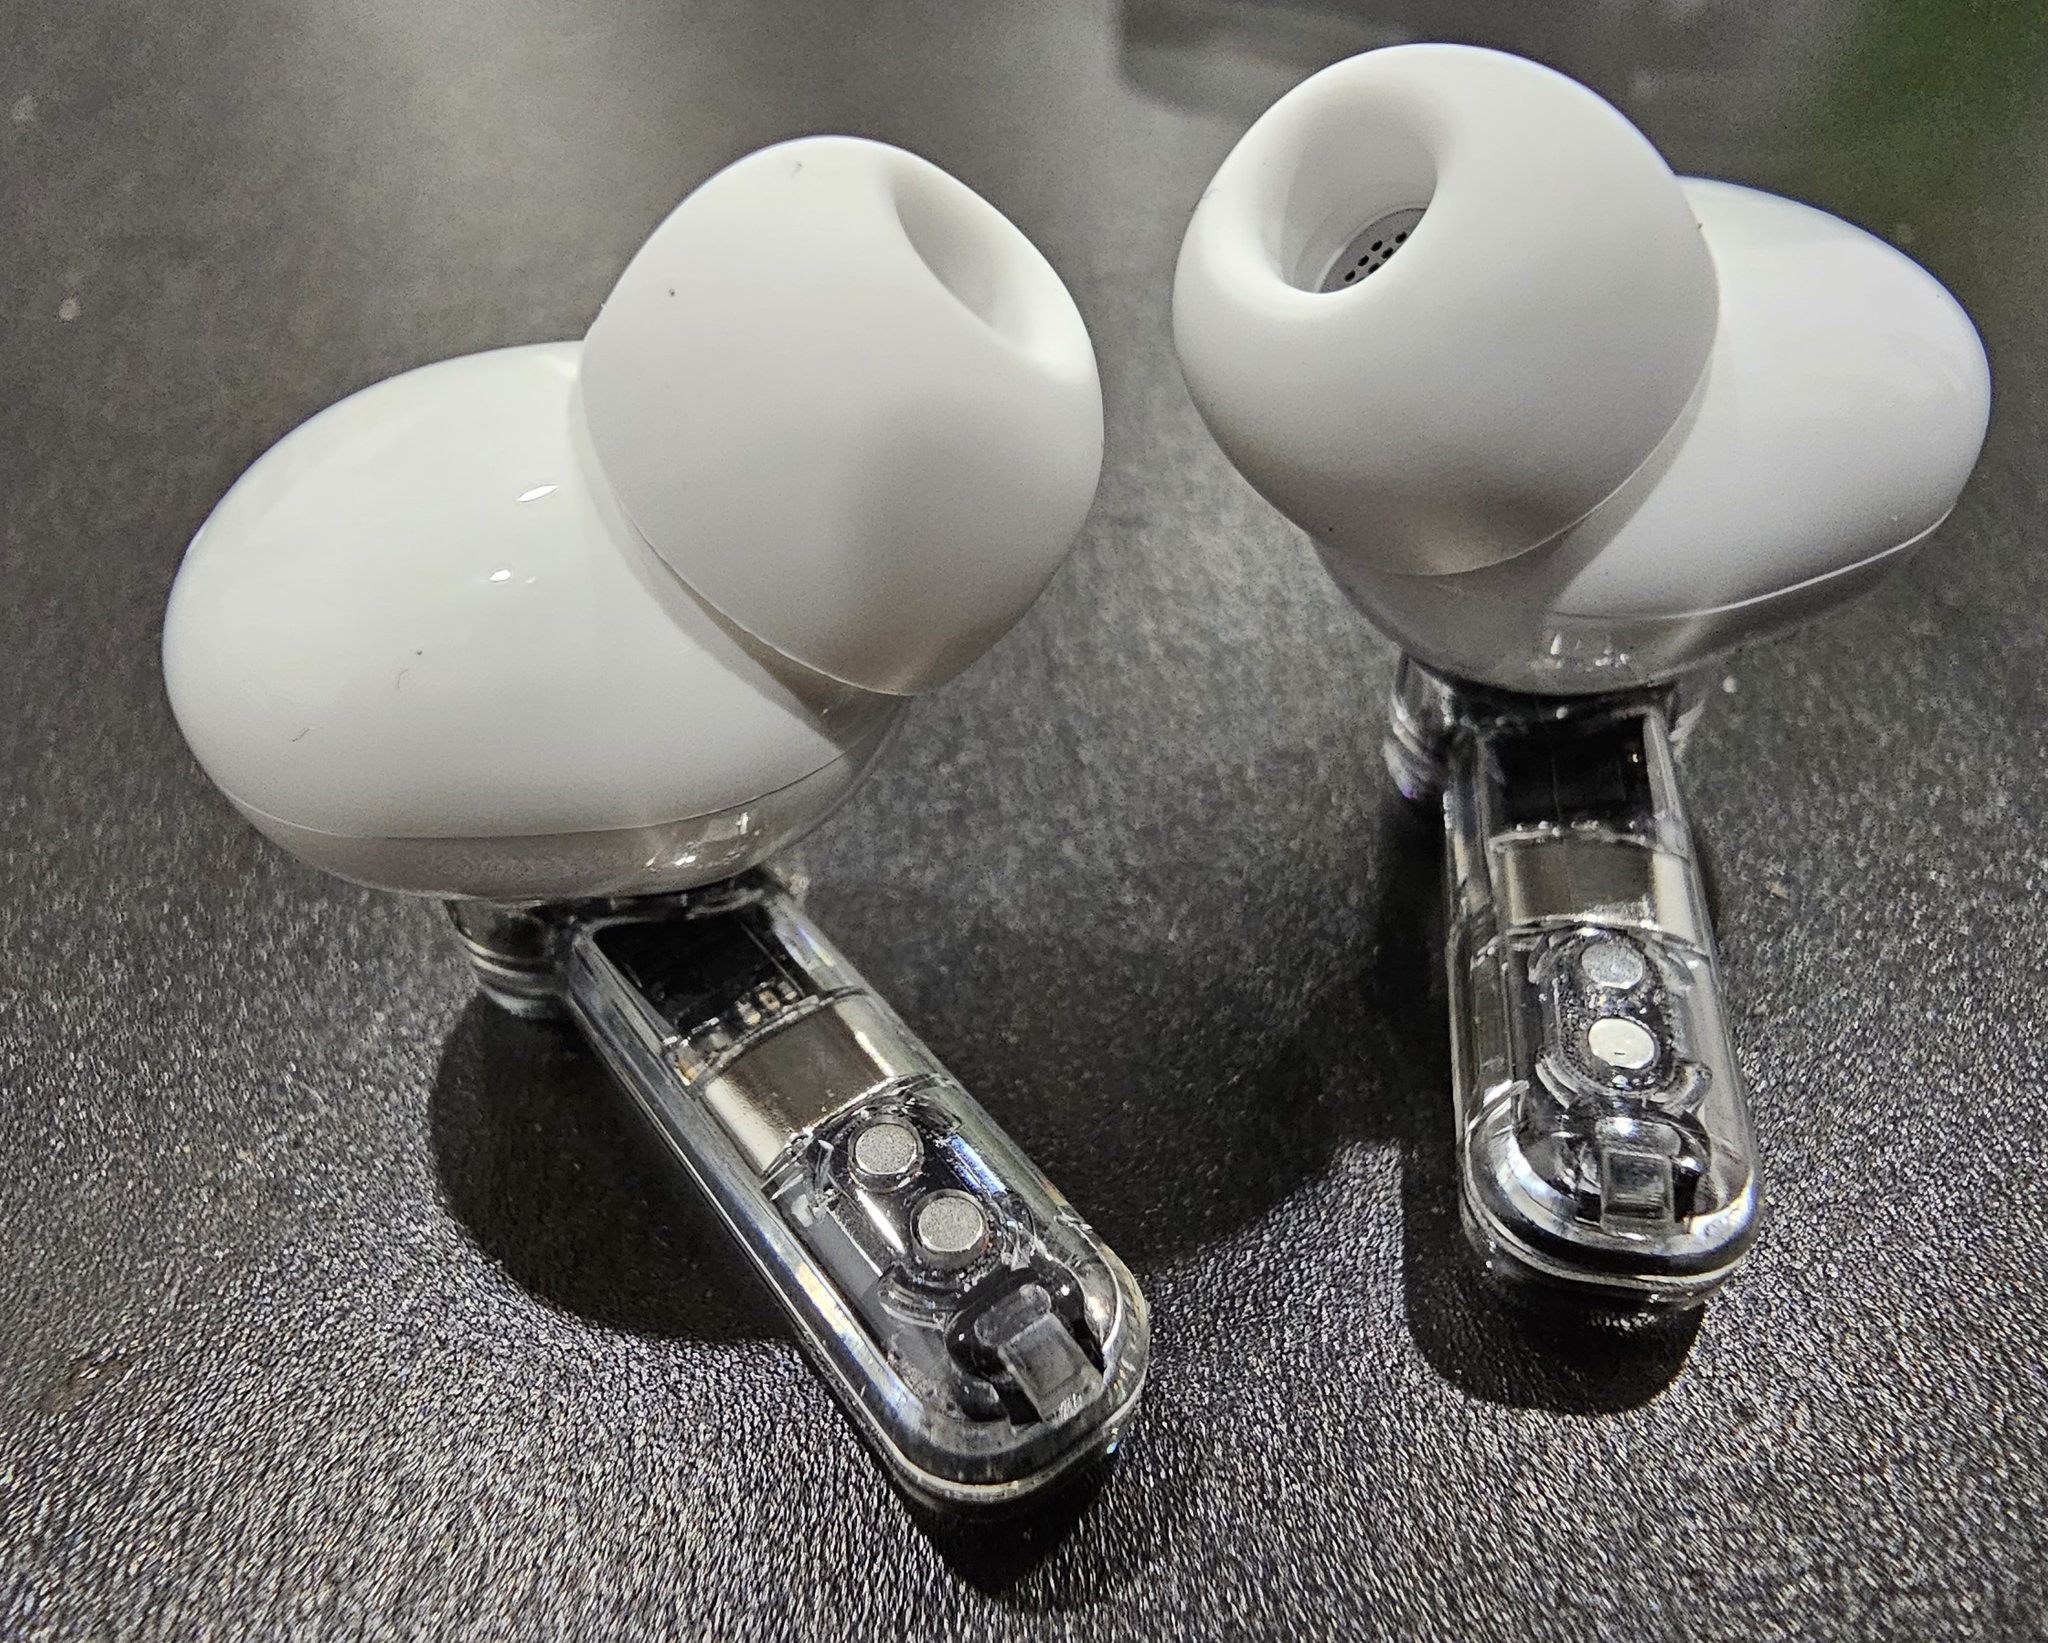 Nothing Ear (2) ANC Earbuds : Detailed Hands-on Review